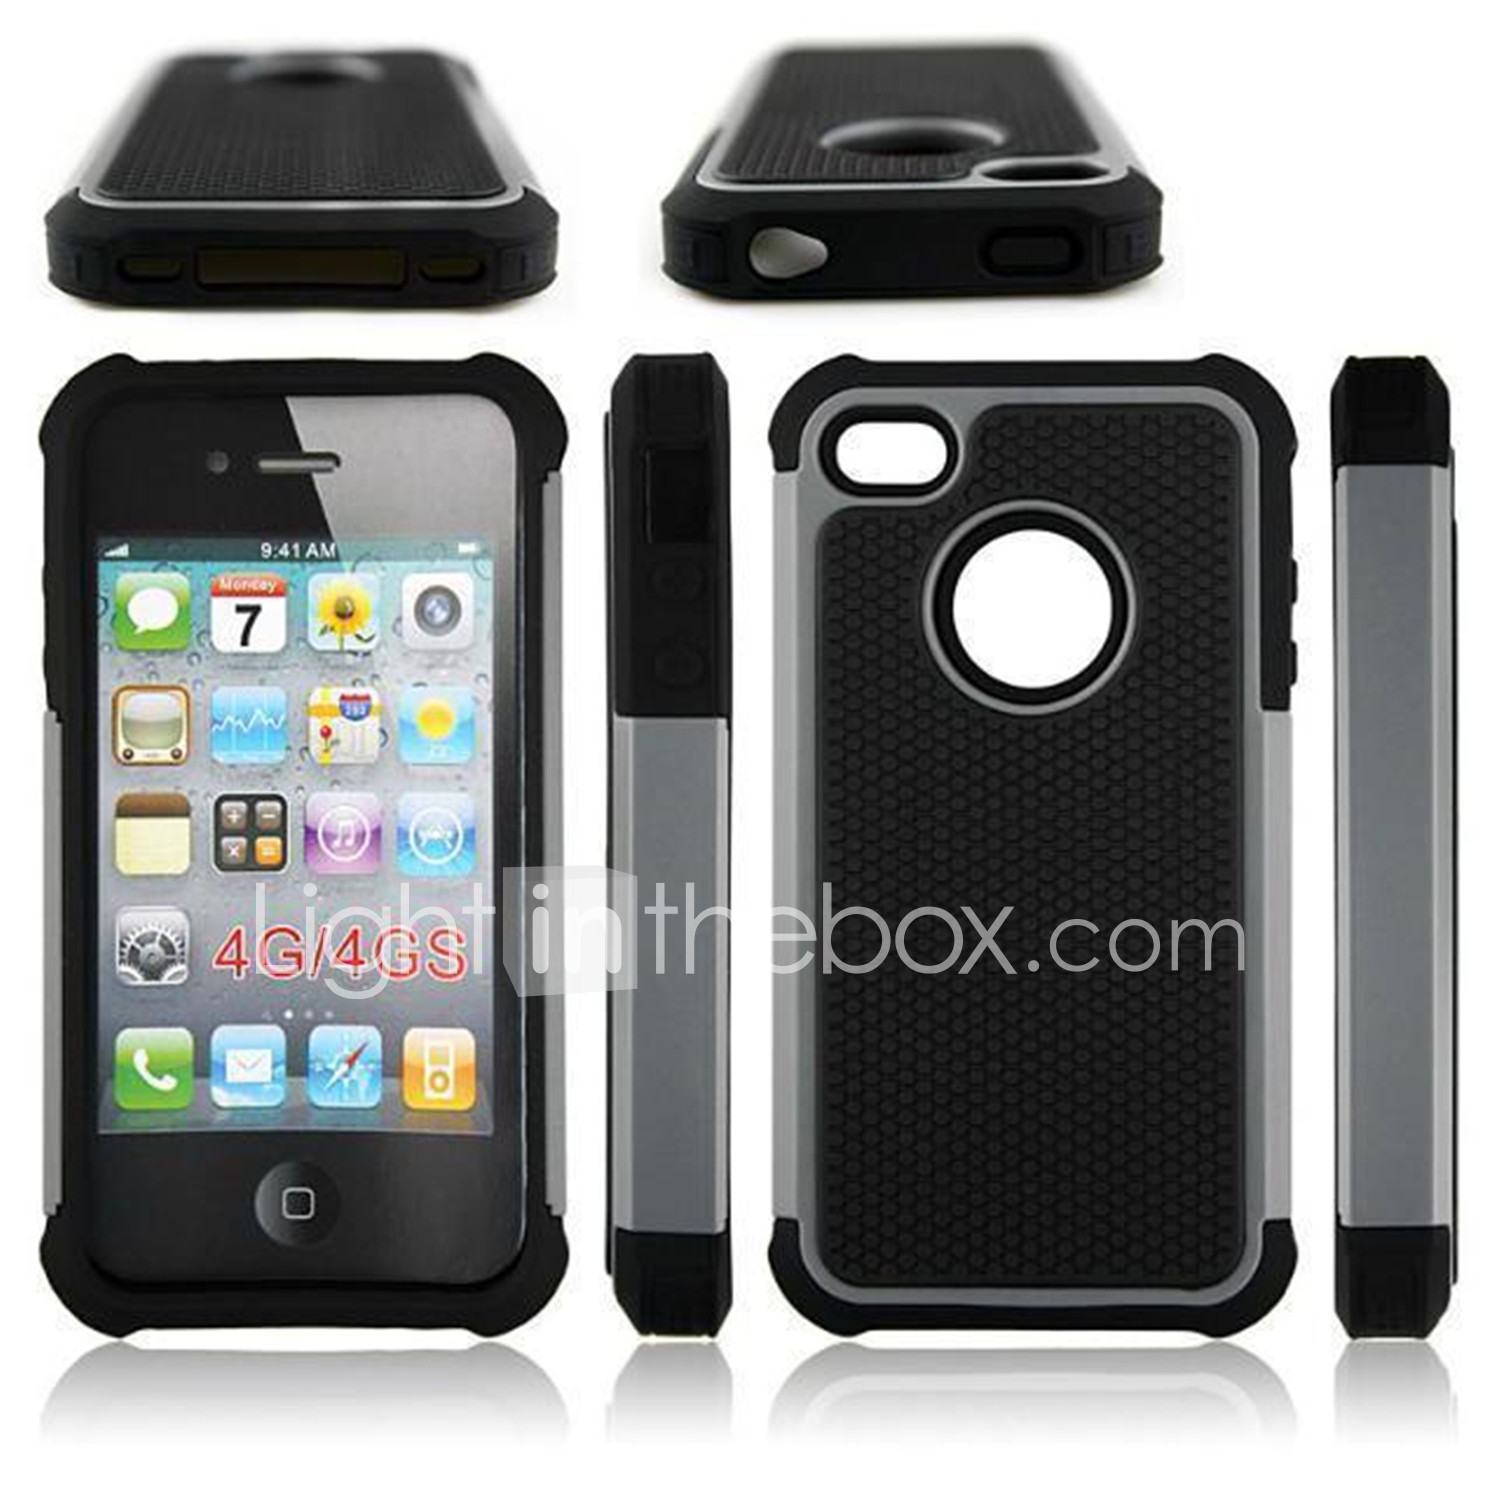 Case For Iphone 4 4s Apple Iphone 4s 4 Back Cover Hard Silicone 4460467 2021 6 29